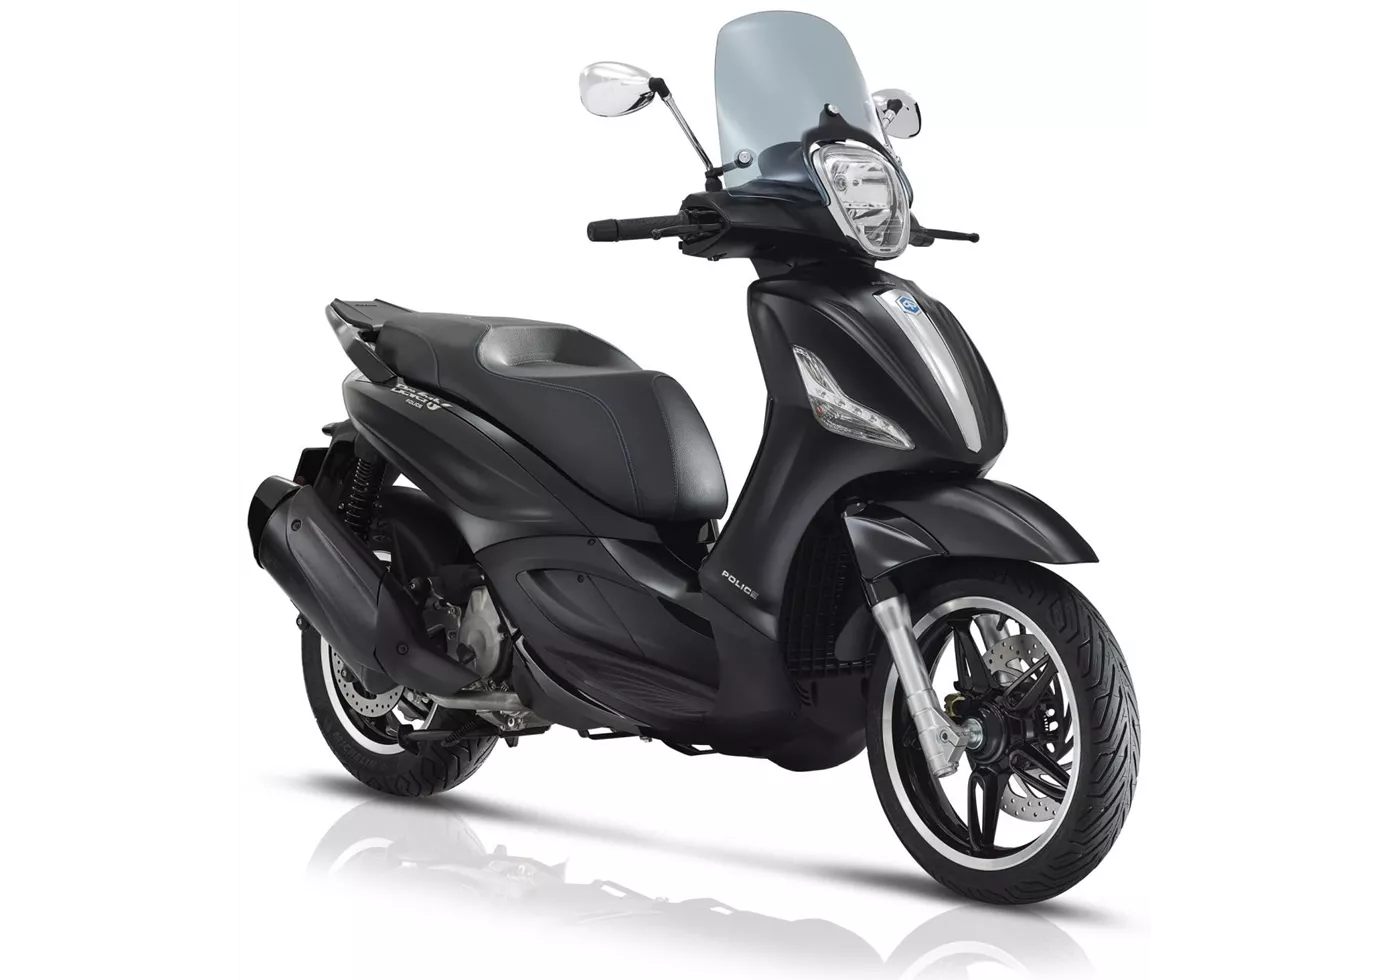 Piaggio Beverly 350ie Police ABS/ASR 2019